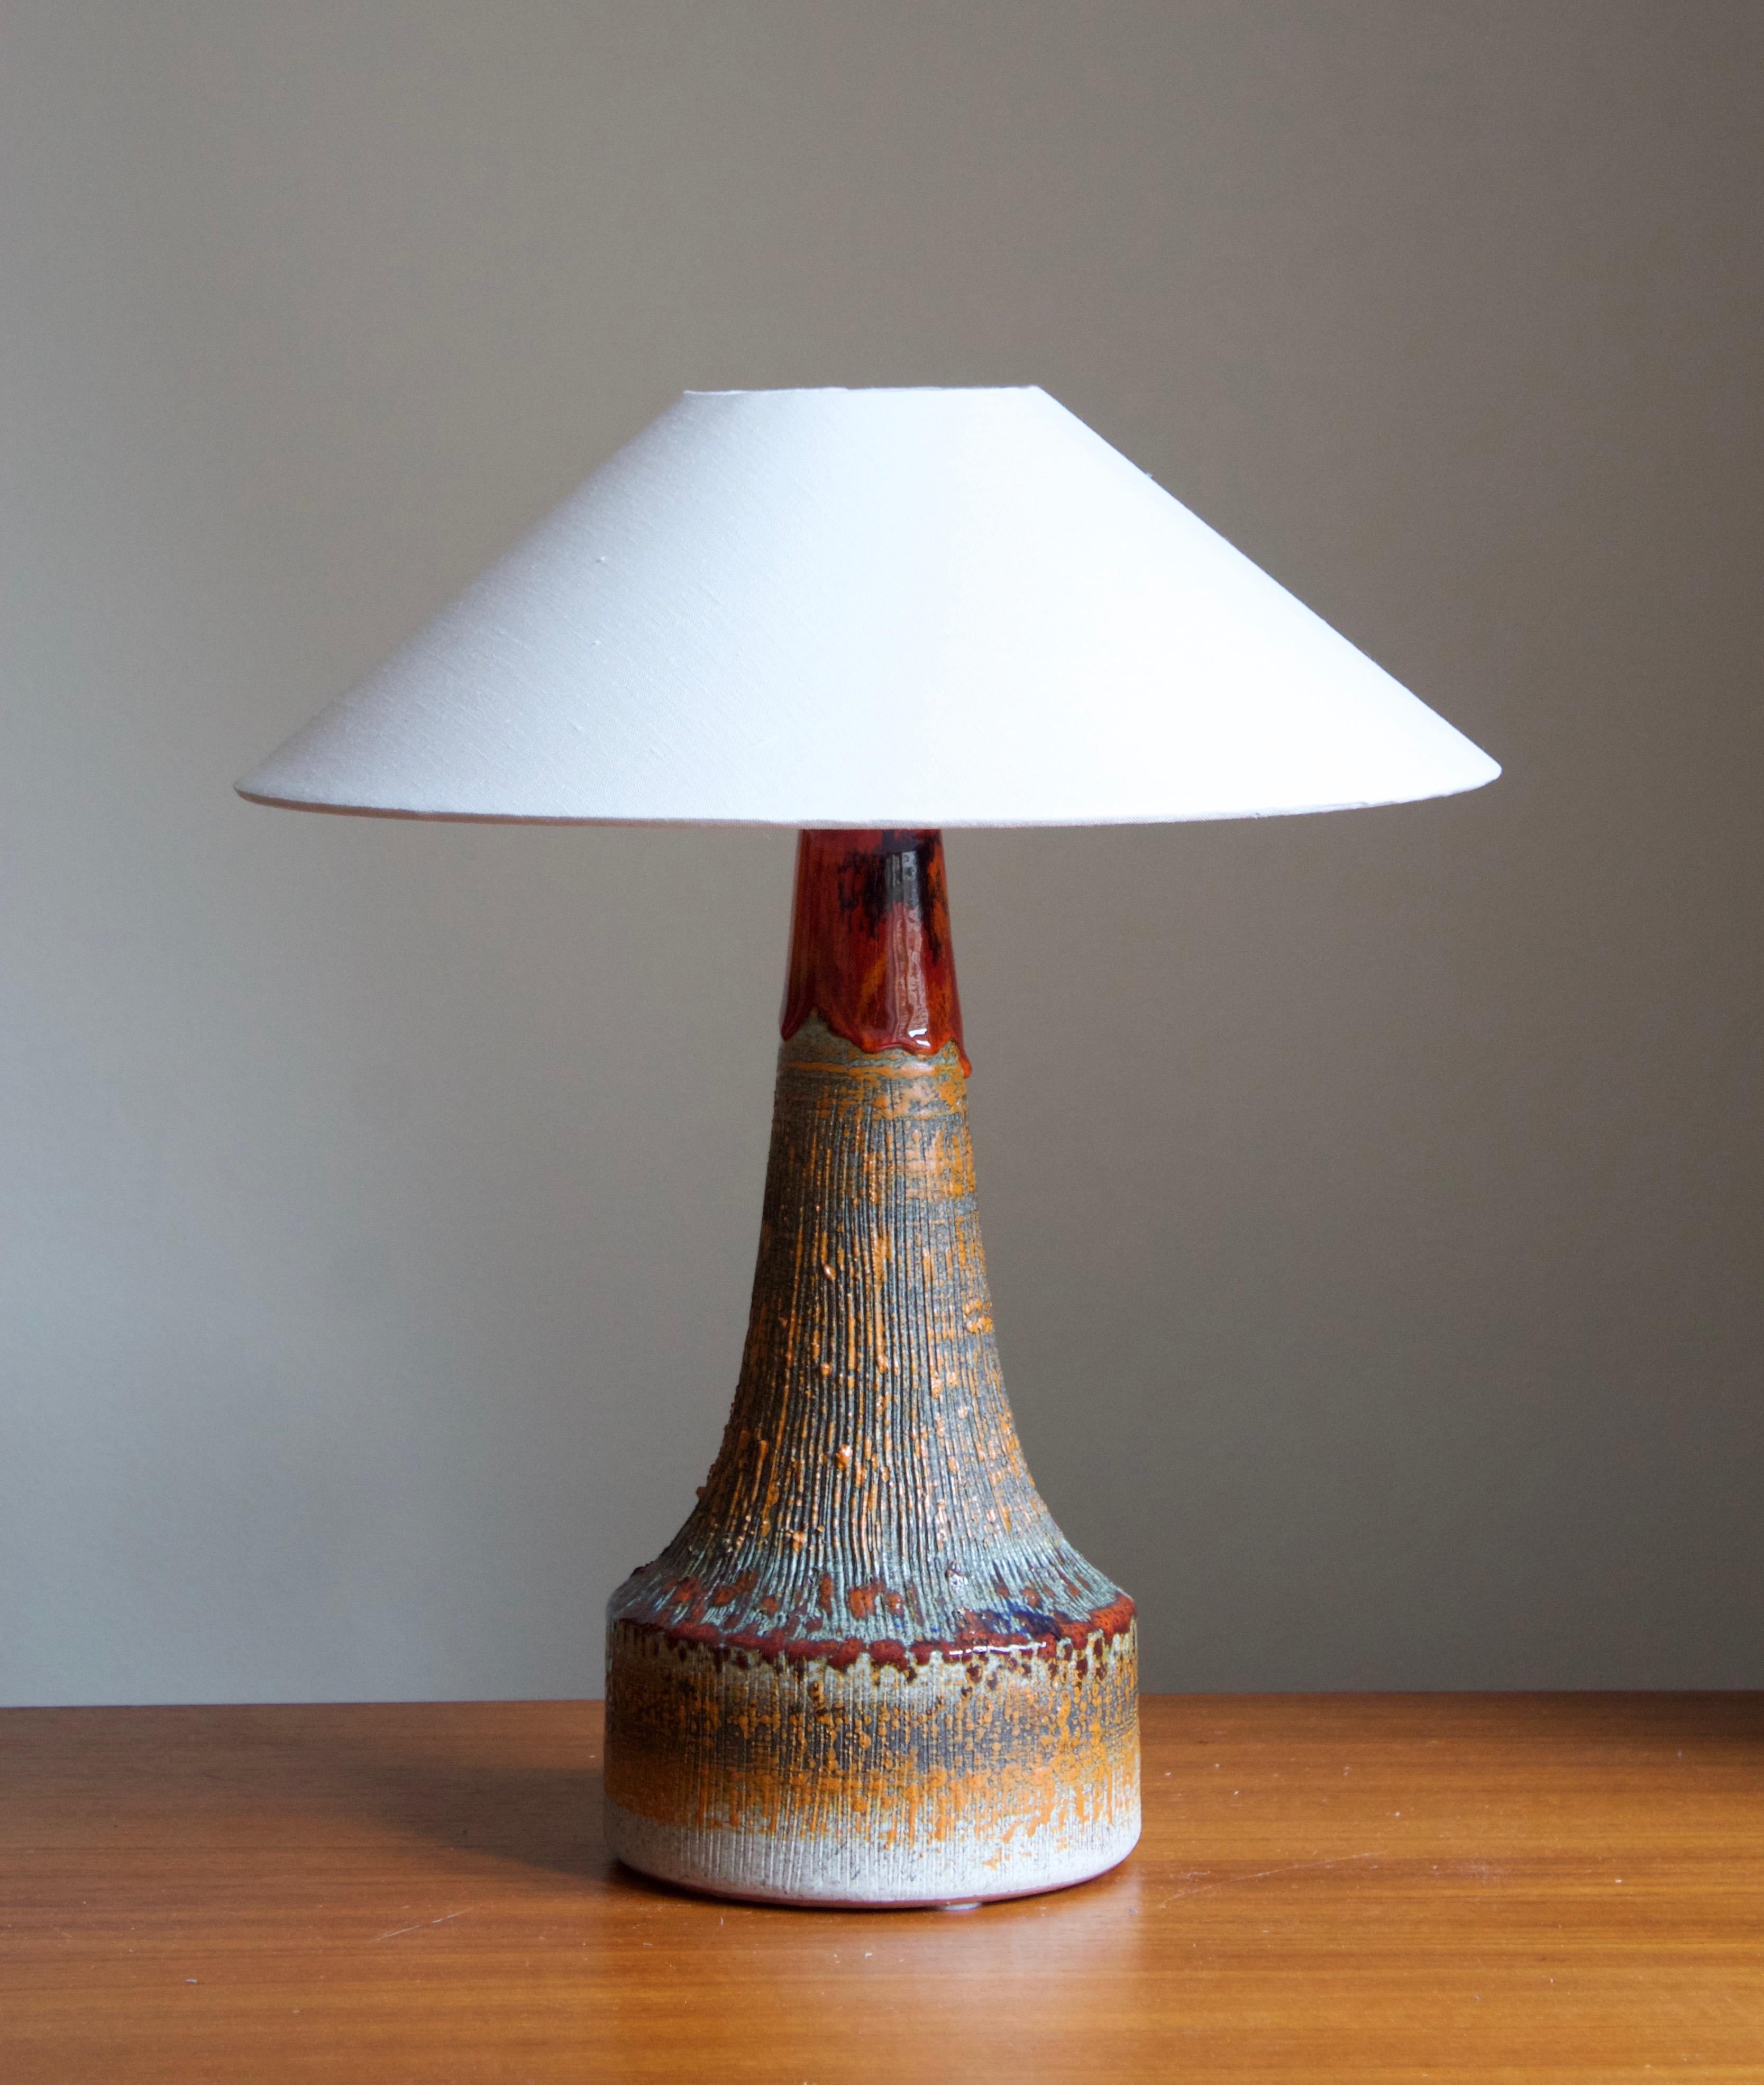 A sizable glazed stoneware table lamp. By Tilgmans Keramik, 1950s. Features a complex glaze combined with incised decor in a style iconic to the producer.

Stated dimensions exclude lampshade. Height includes socket. Sold without lampshade.

Glaze